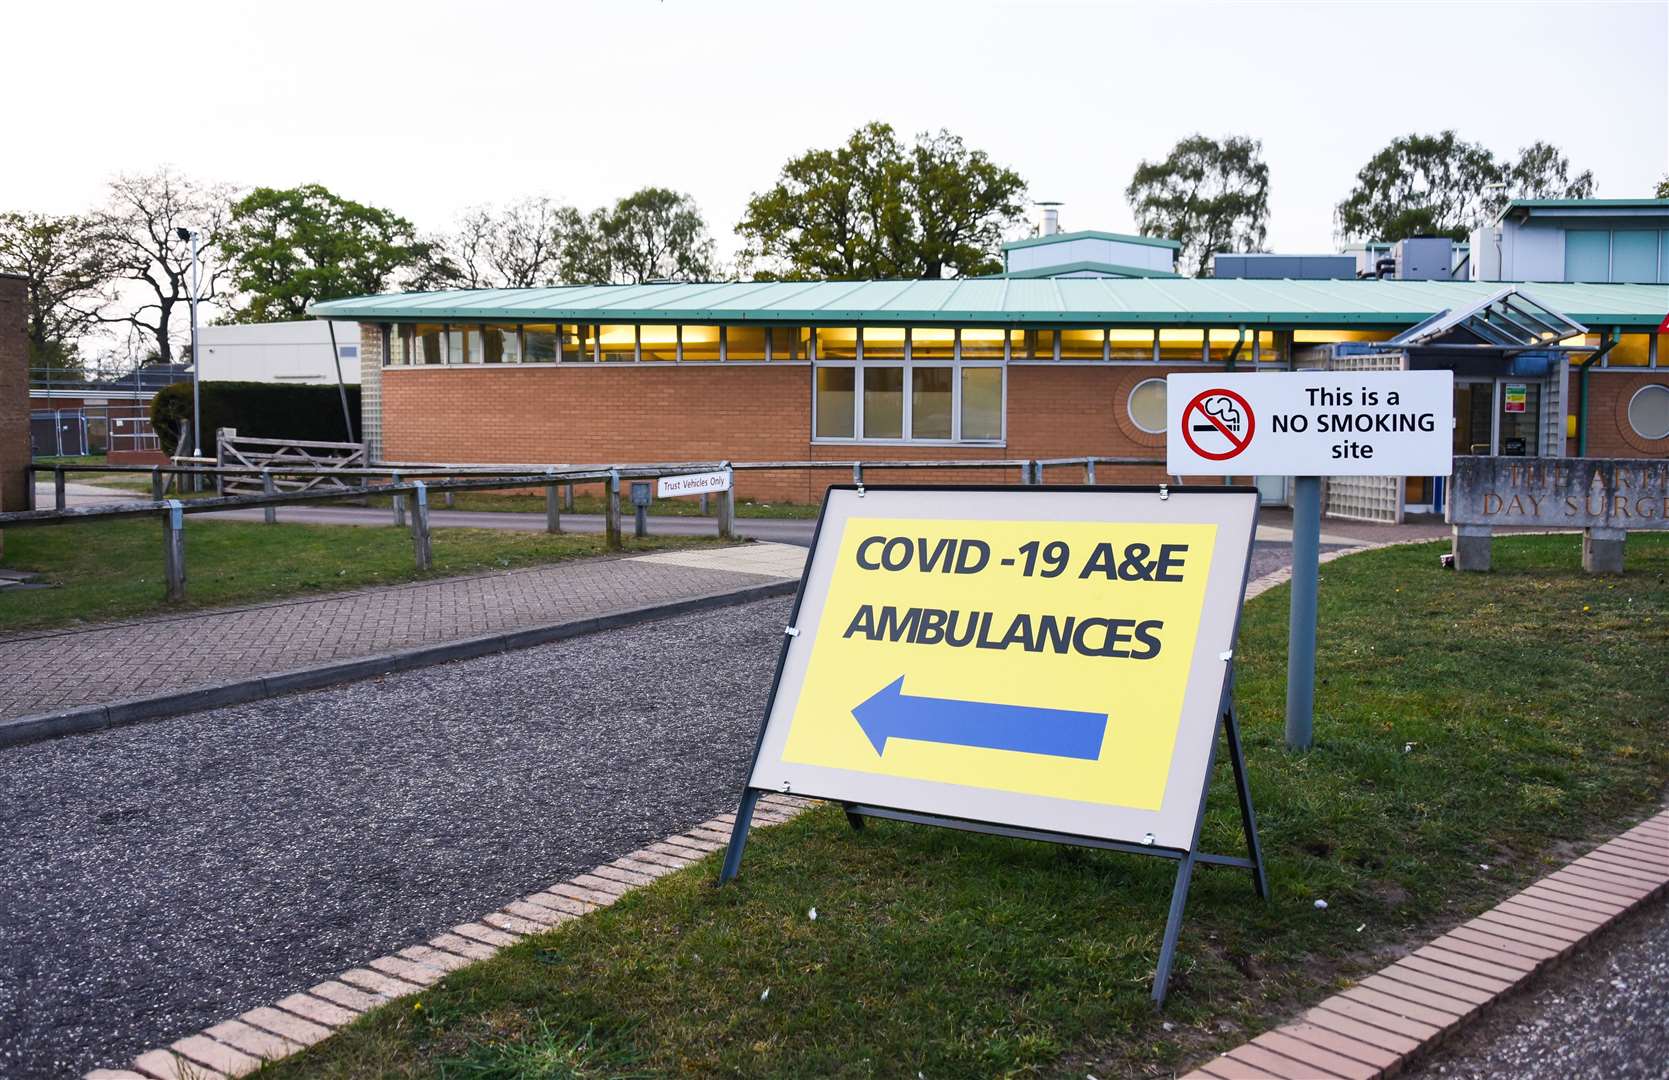 Covid has strained hospitals across Kent and the rest of the country, but numbers are now far lower